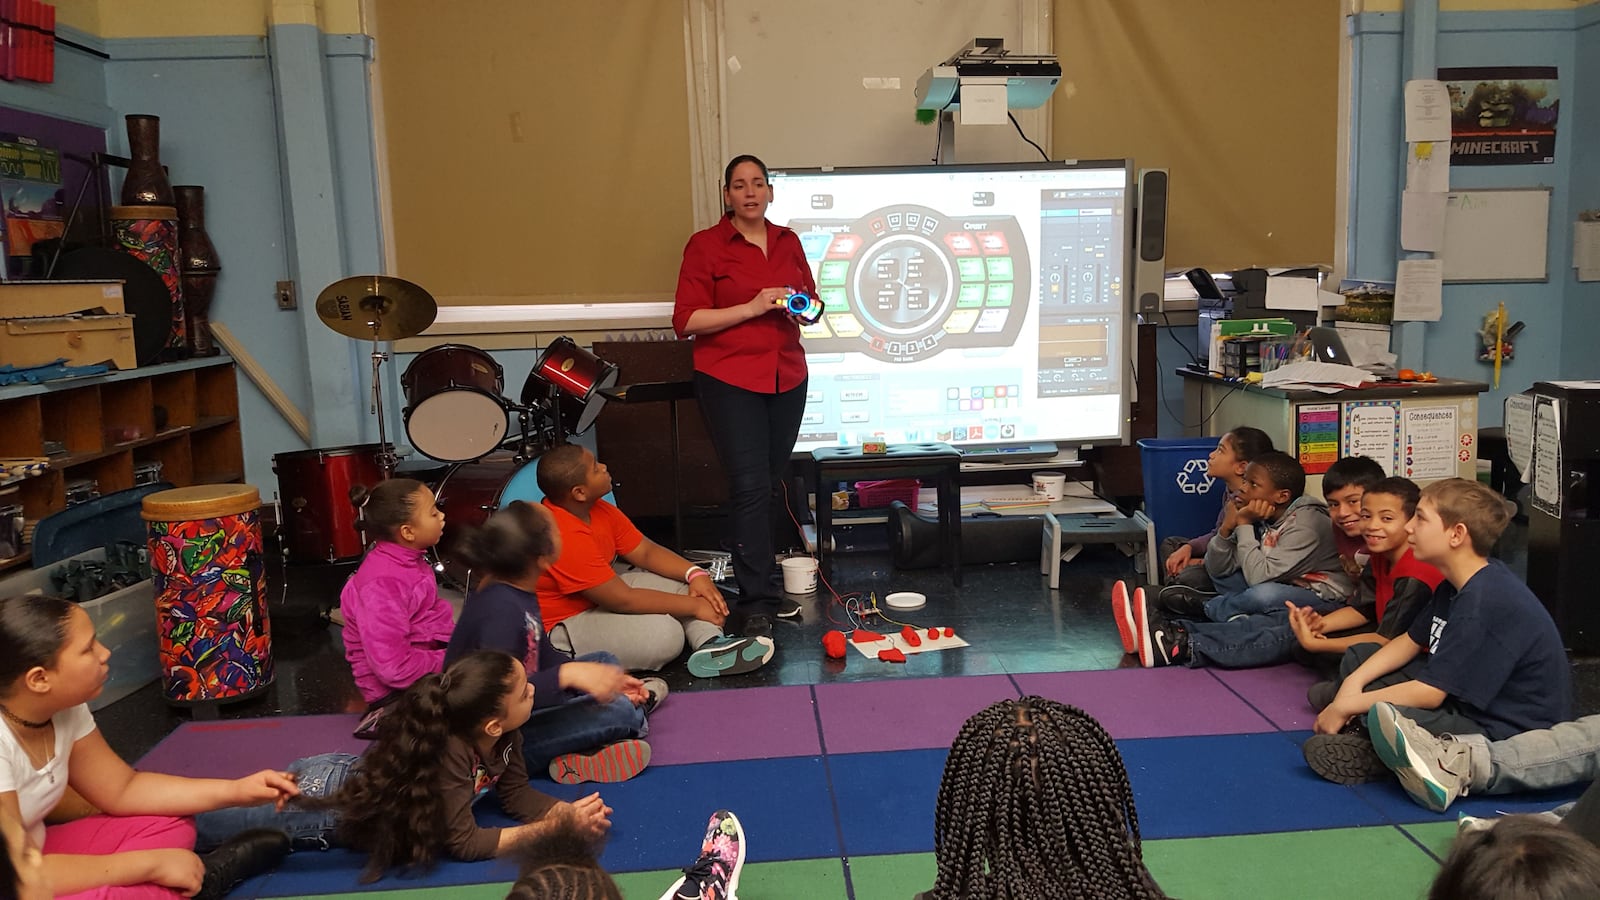 Melissa Salguero uses technology and science experiments to teach her music class at P.S. 48 in the Bronx.